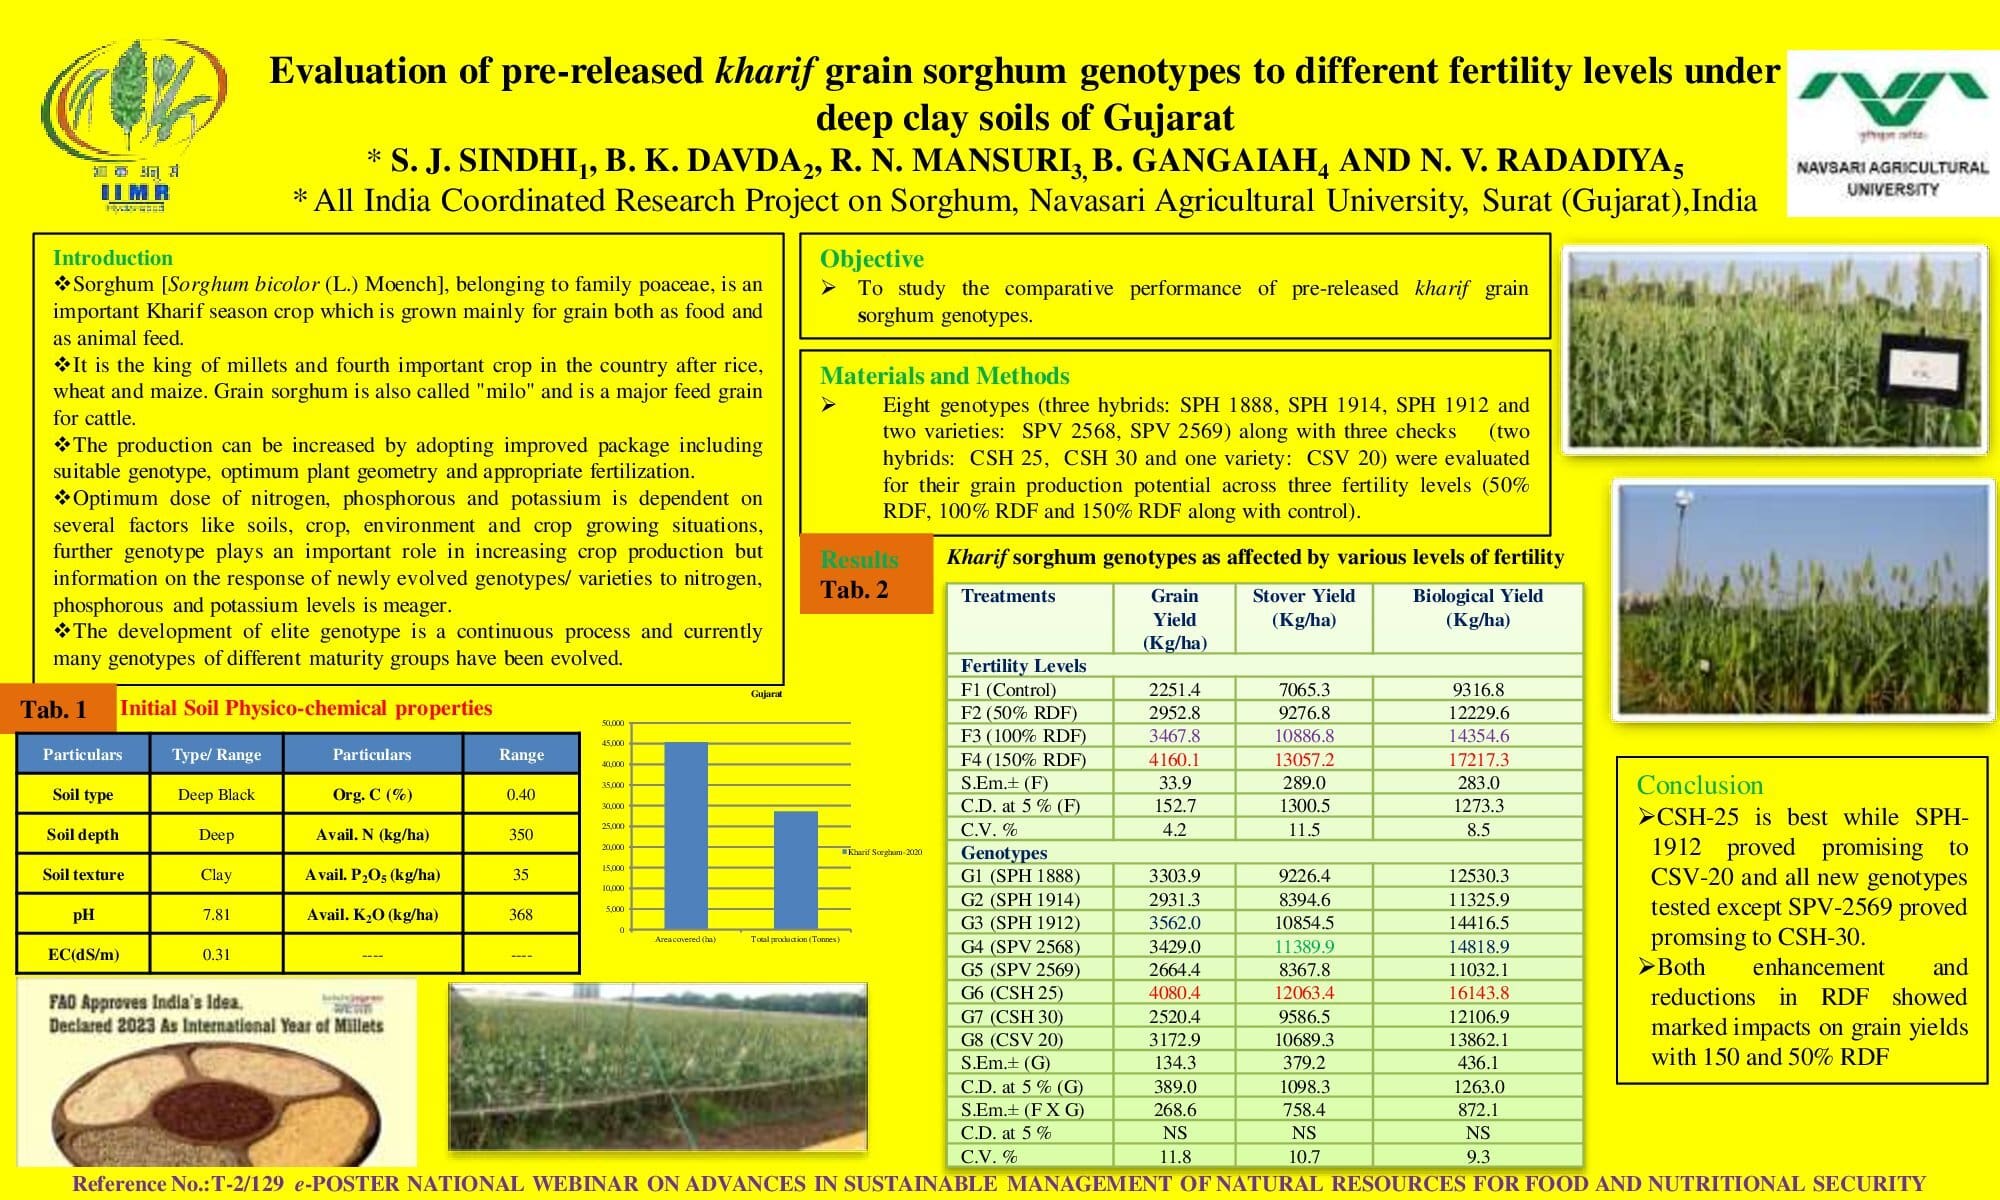 Evaluation of pre-released kharif grain sorghum genotypes to different fertility levels under deep clay soils of Gujarats